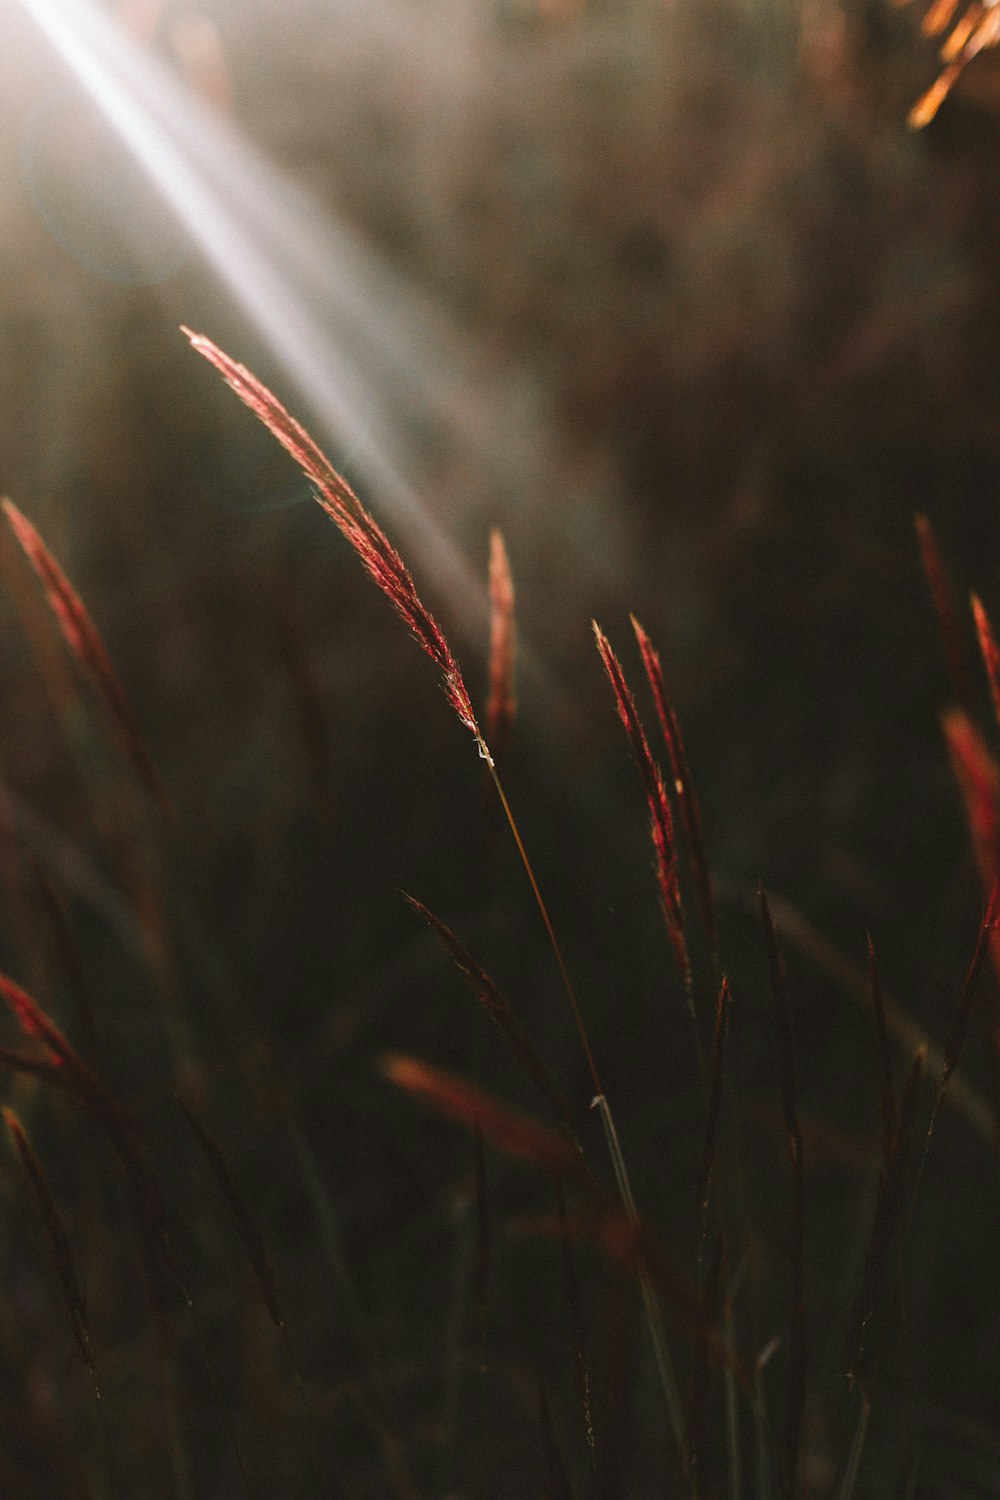 a close up of some grass with the sun in the background